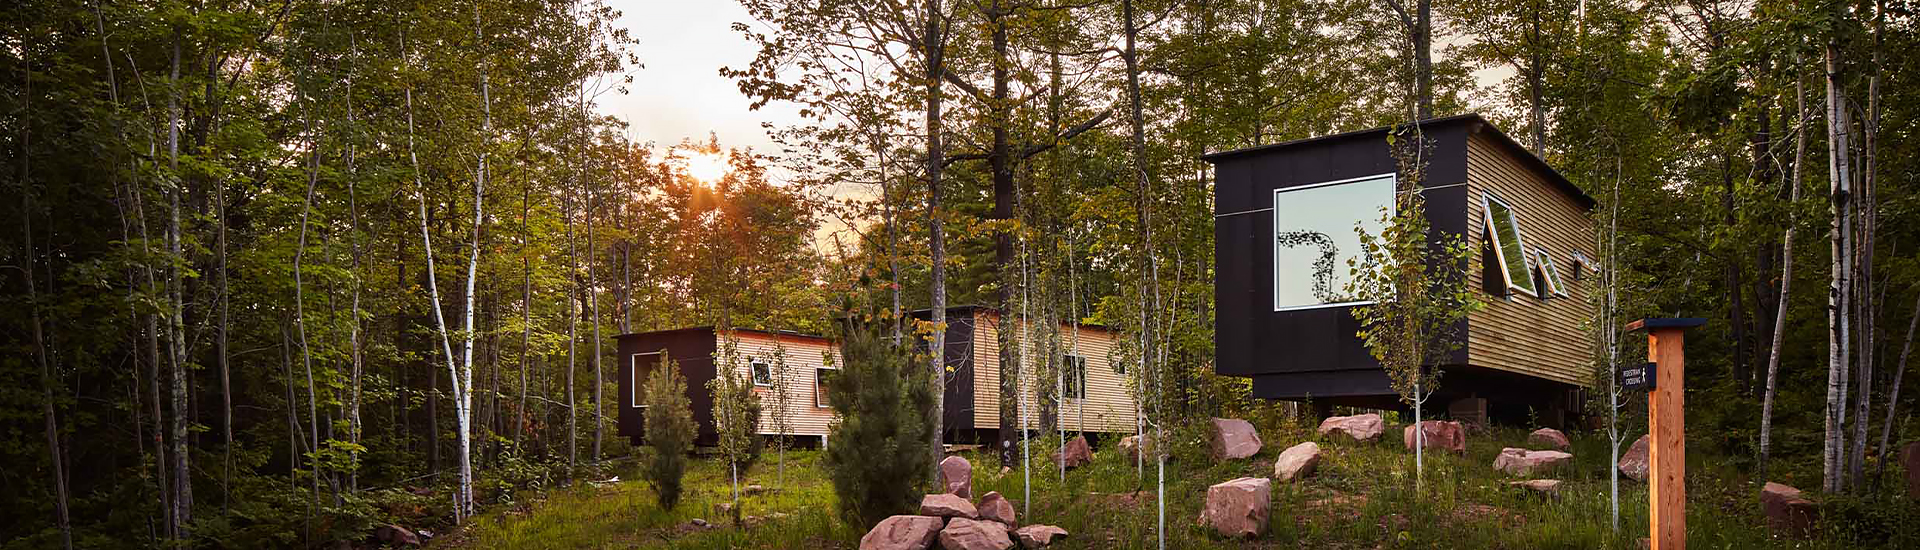 View of three cabins in the middle of the woods